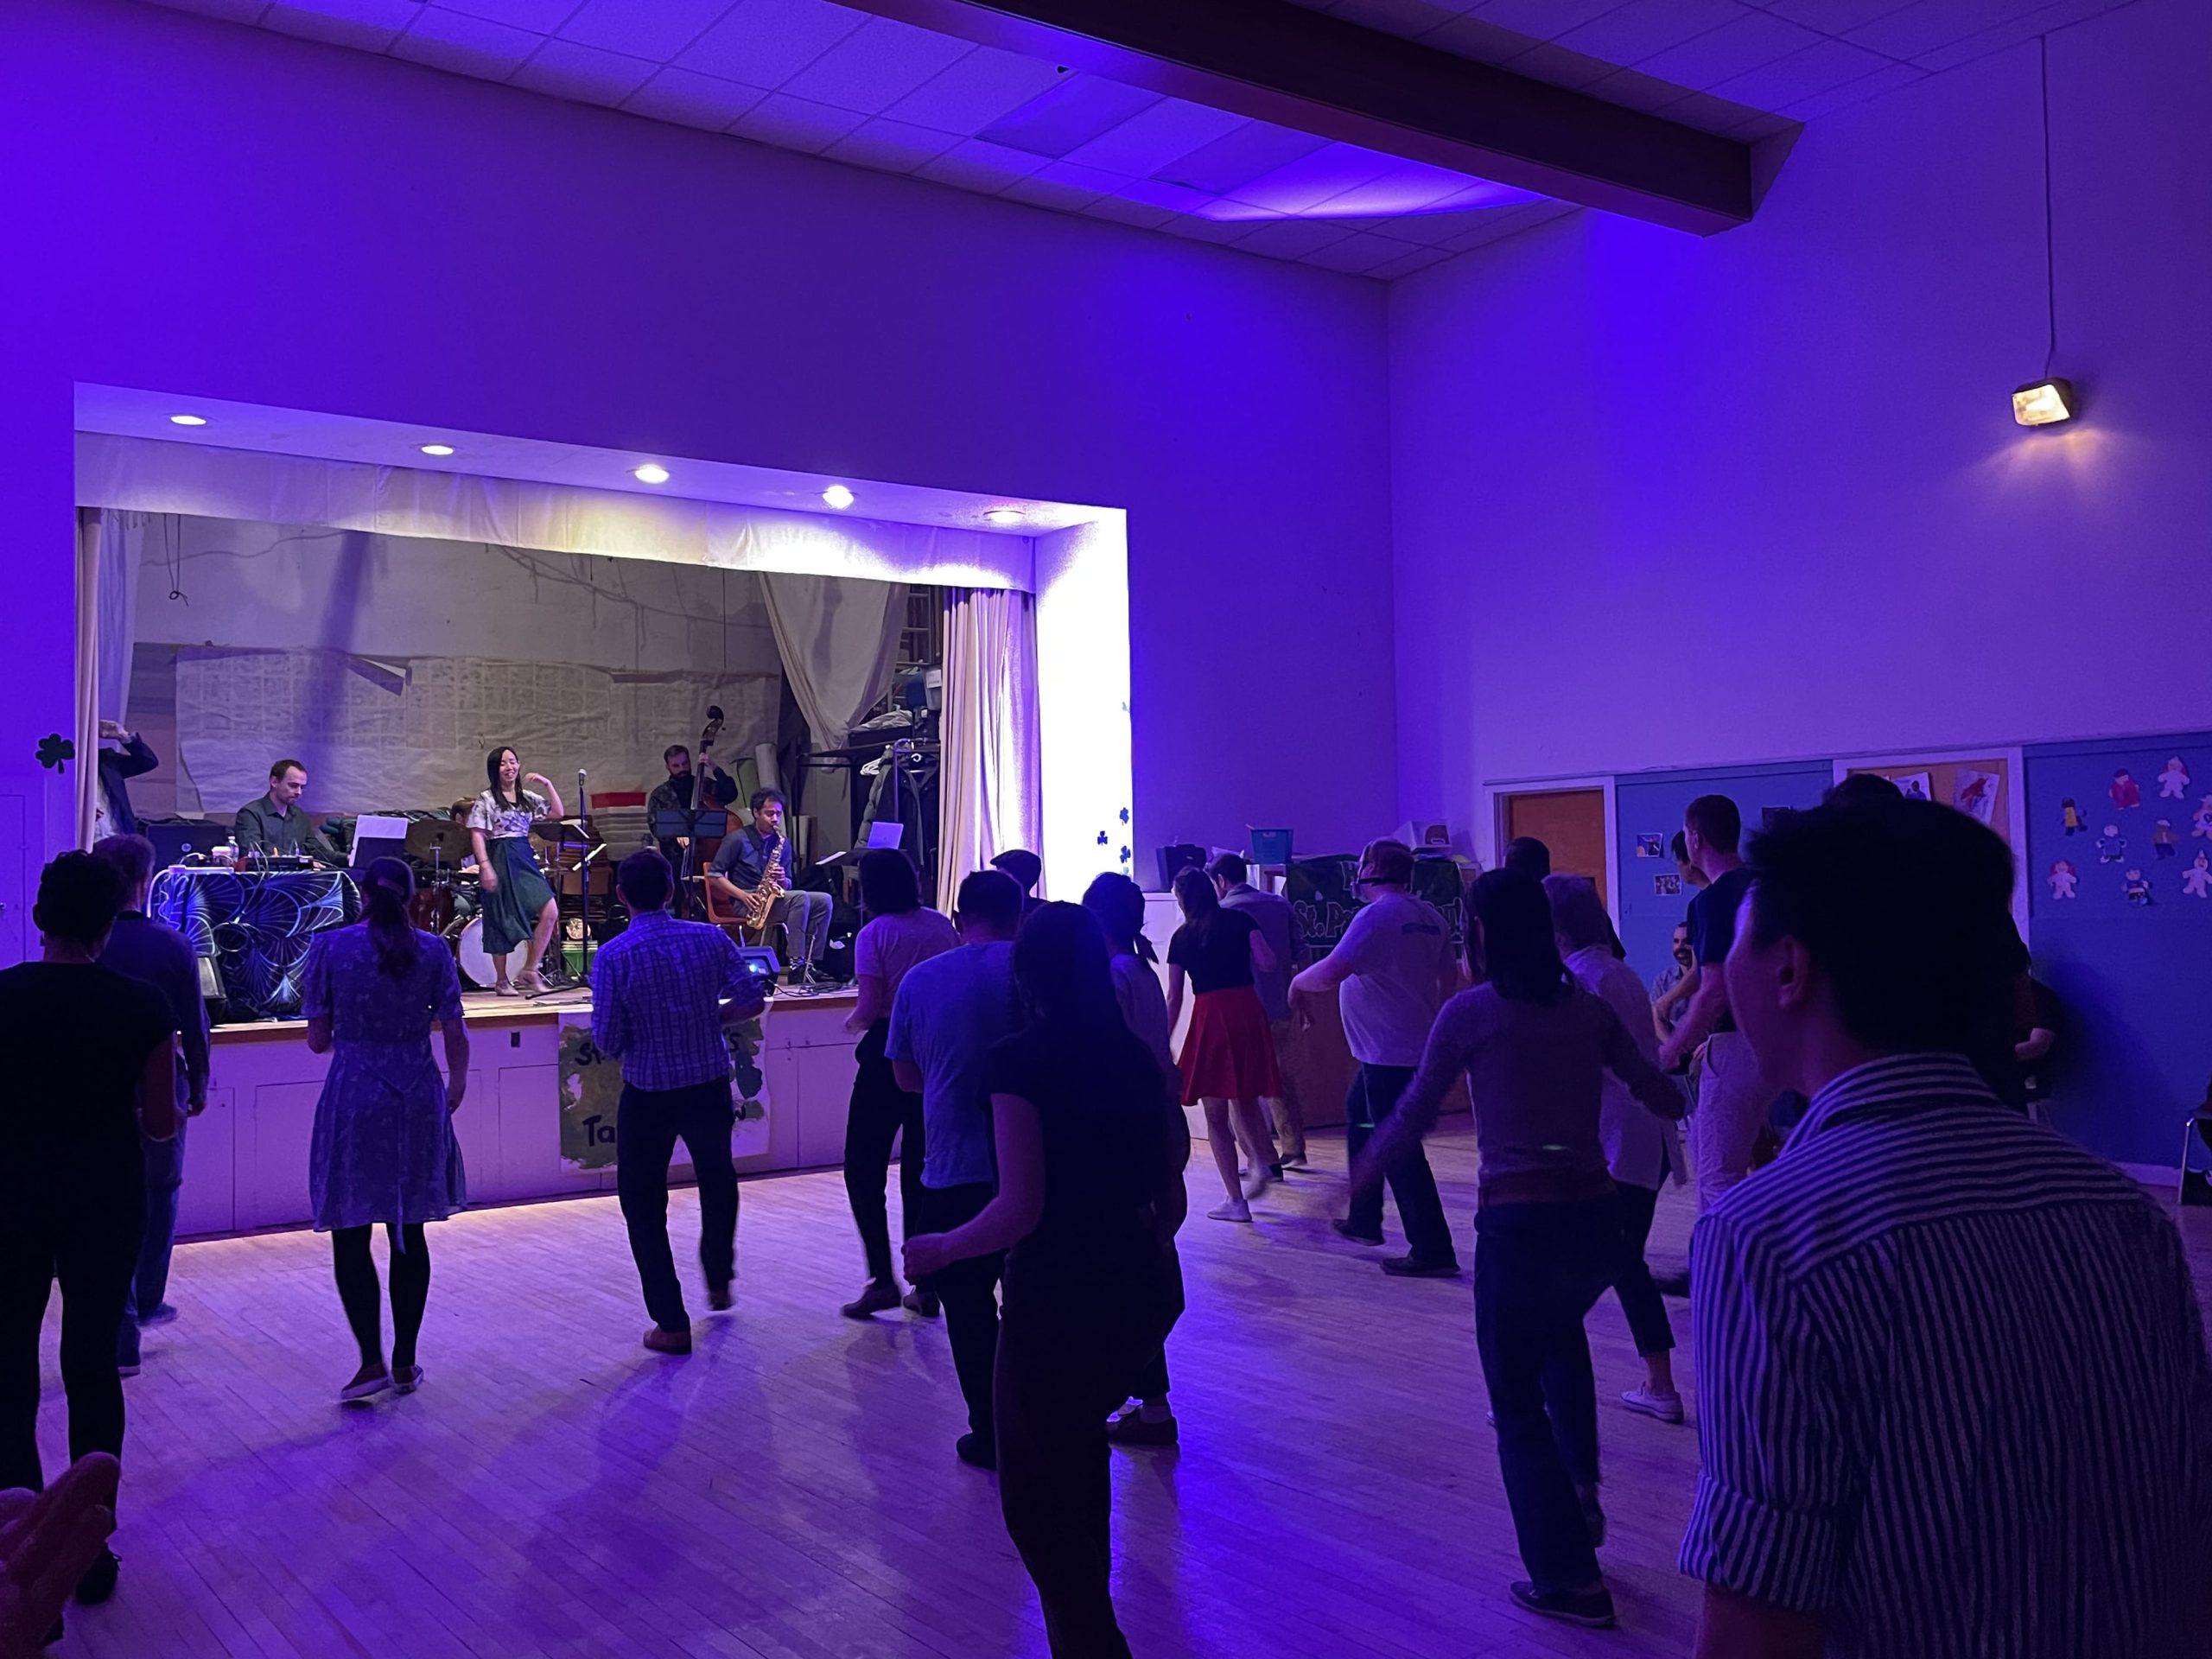 People dancing in a hall with a live band performing on stage.